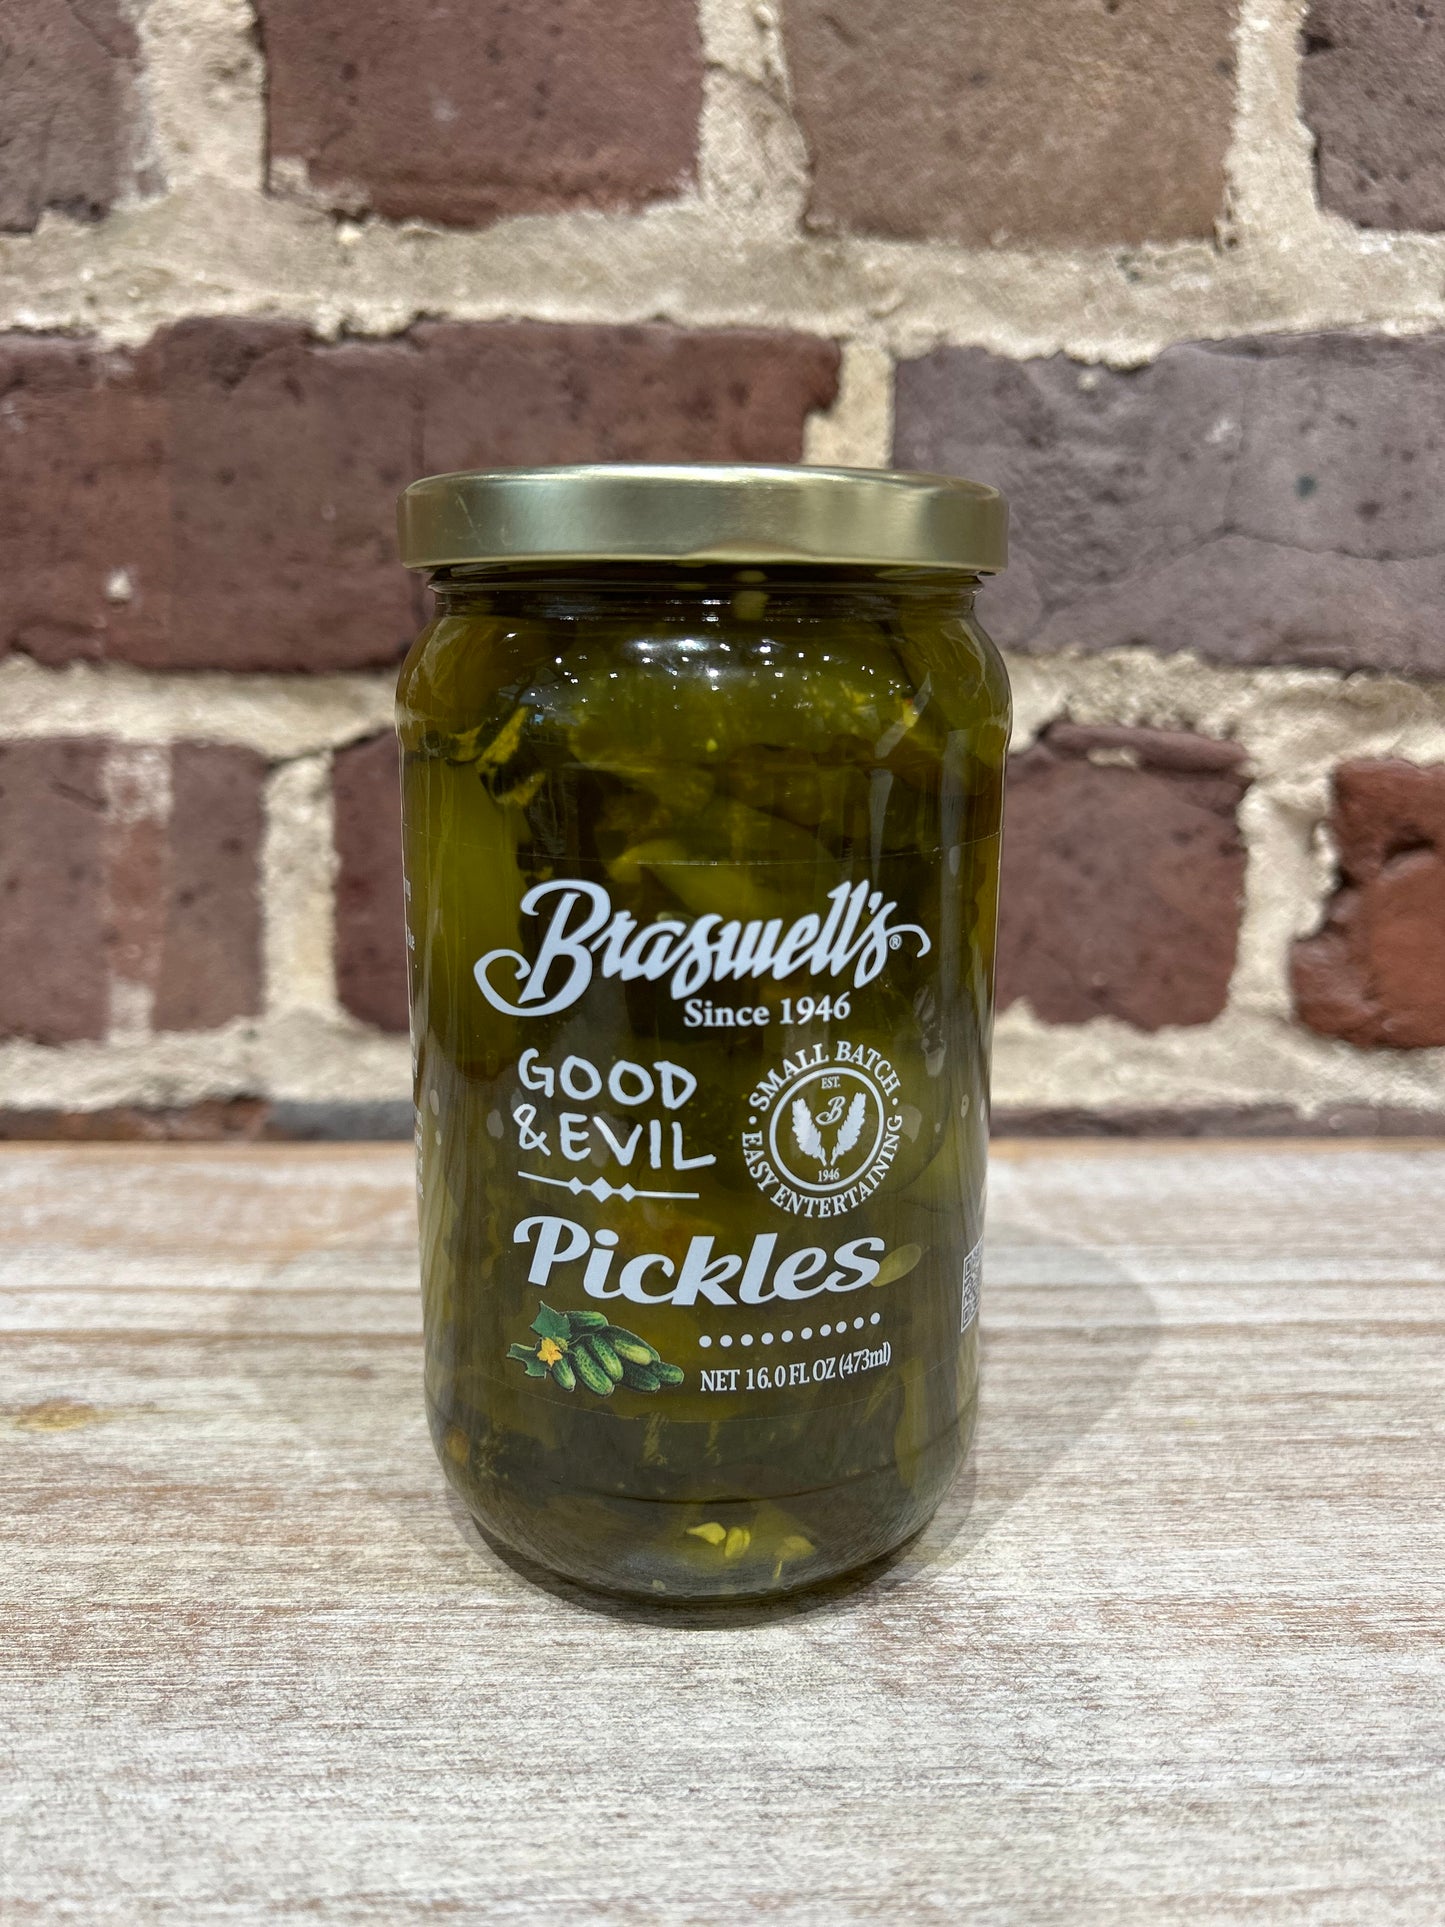 Good & Evil Pickles - Braswell's - Local Brand